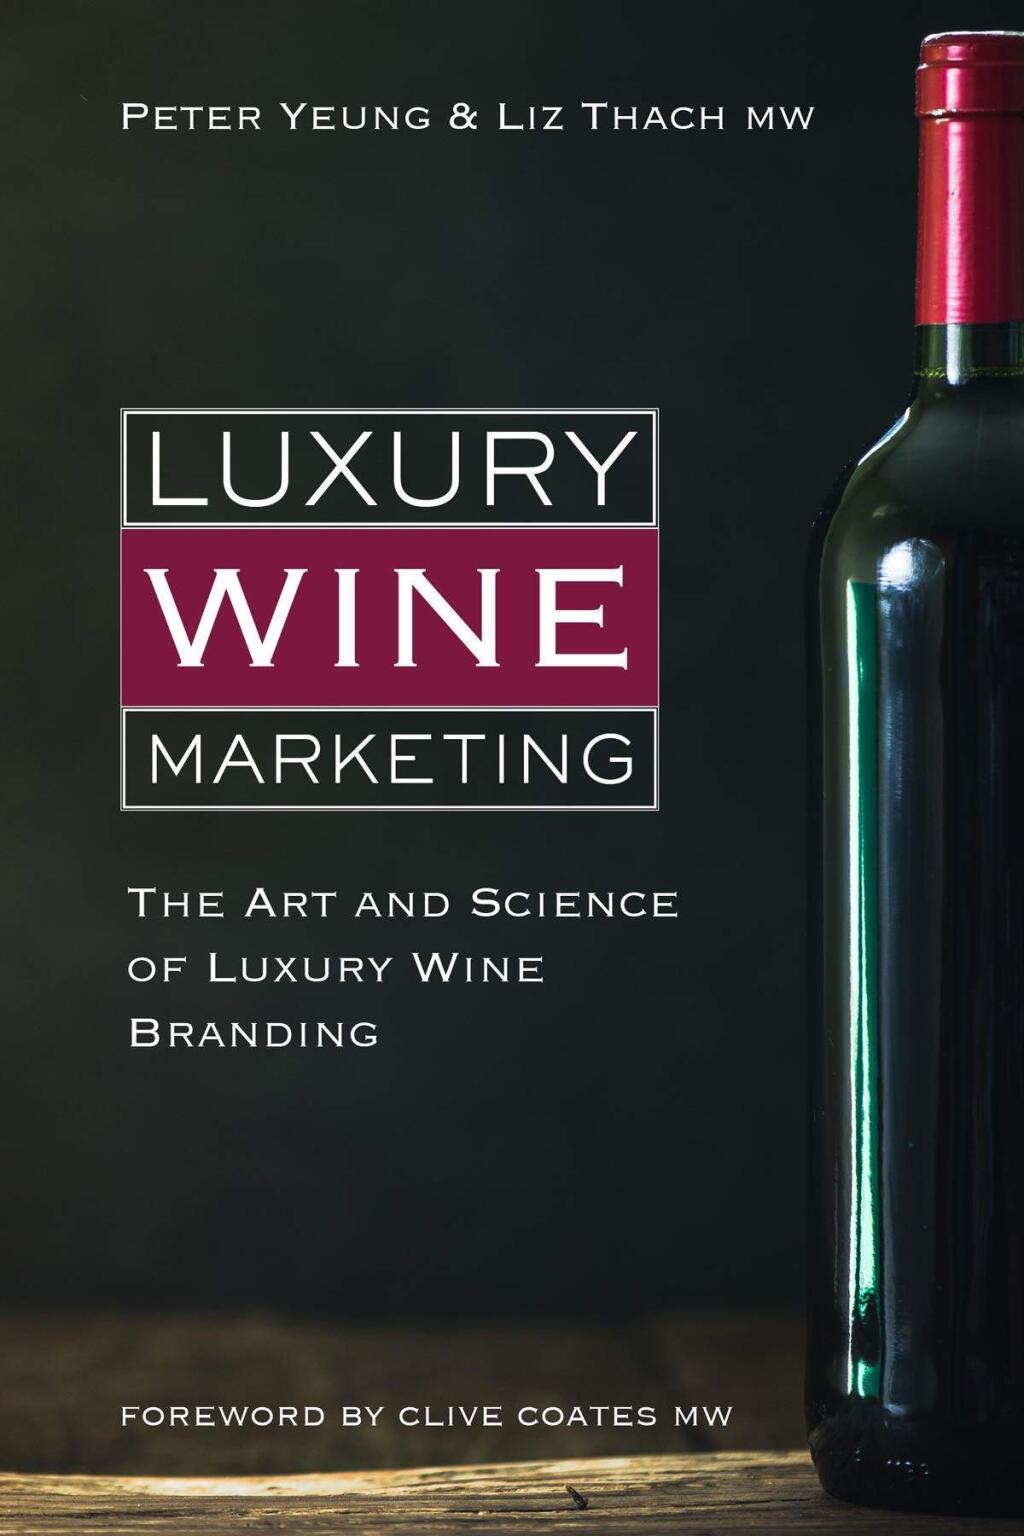 'Luxury Wine Marketing,' a new book by Peter Yeung and Liz Thach may pique the interest of collectors. (Peter Yeung and Liz Thach)